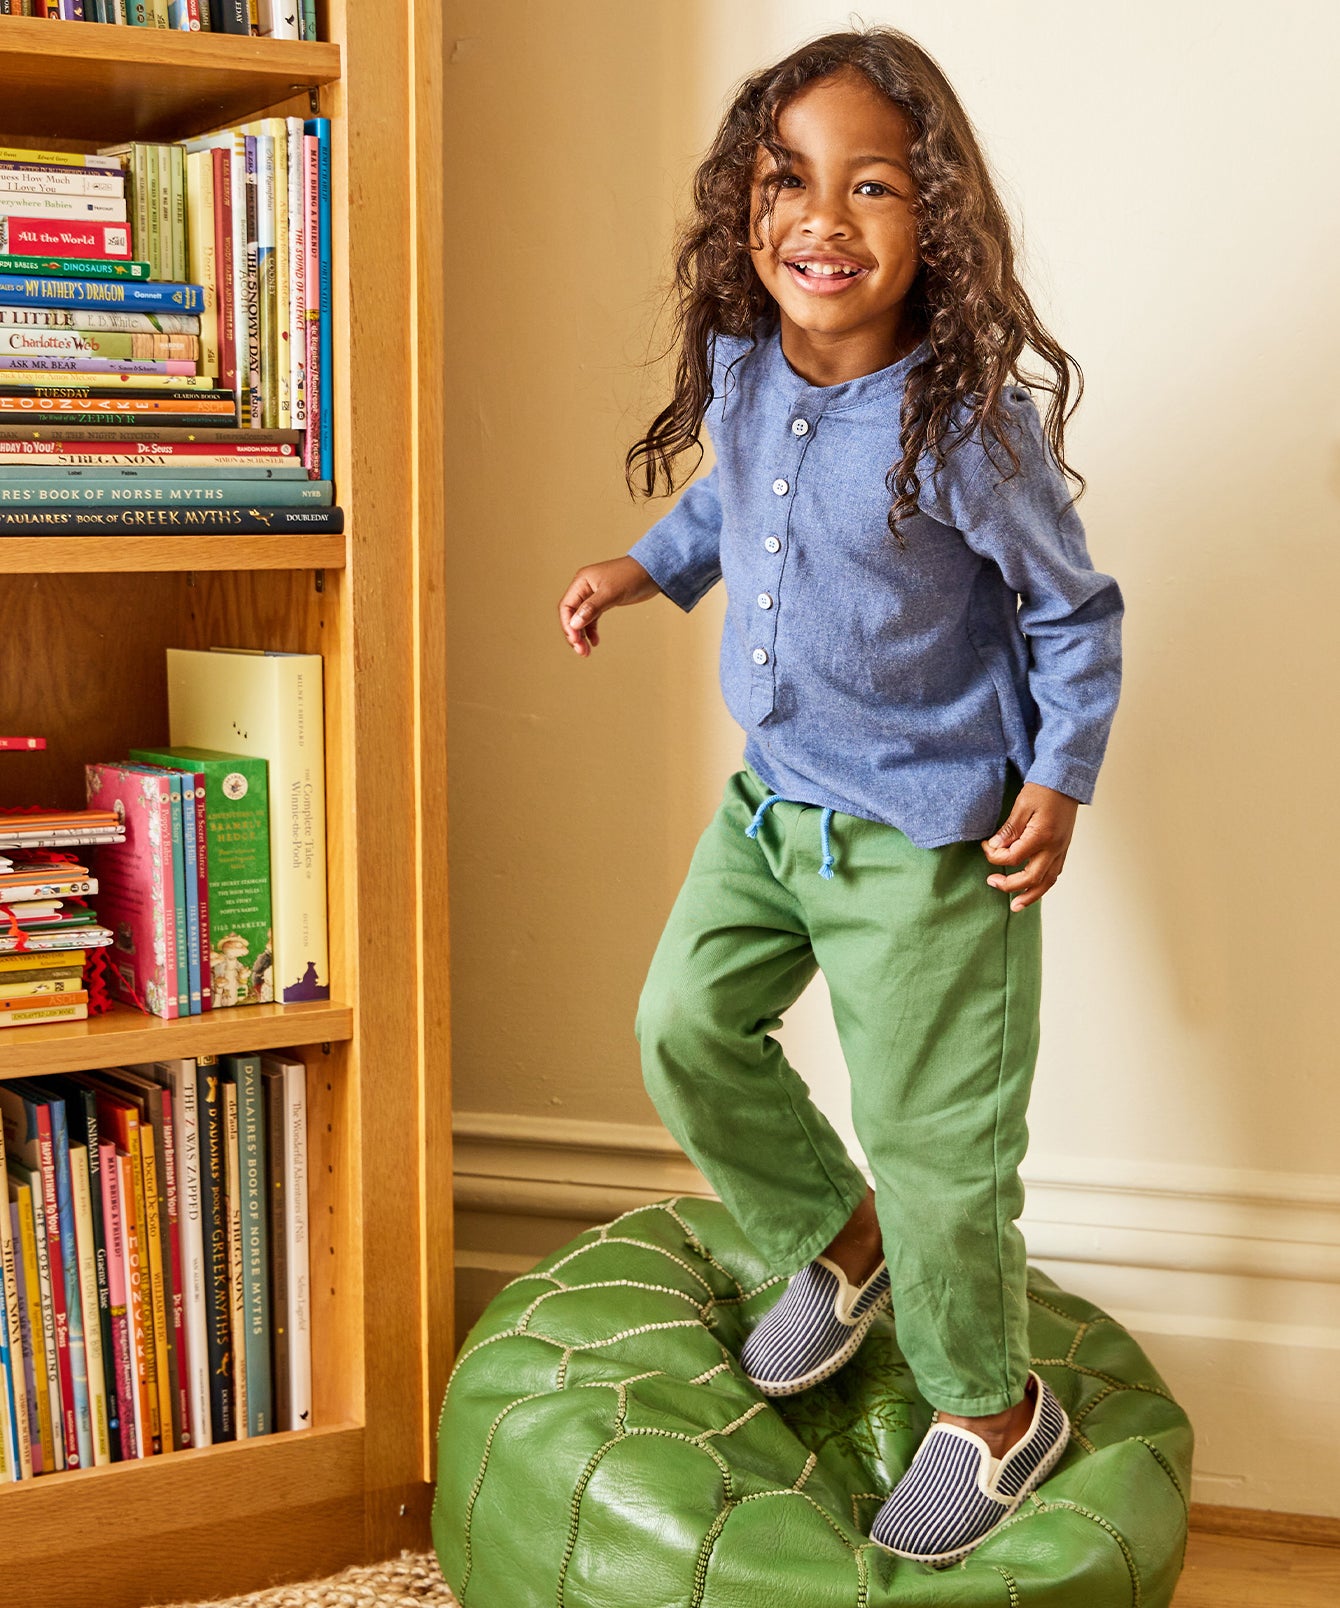 Green Pant for Kids with Growth Spurts | Oso & Me